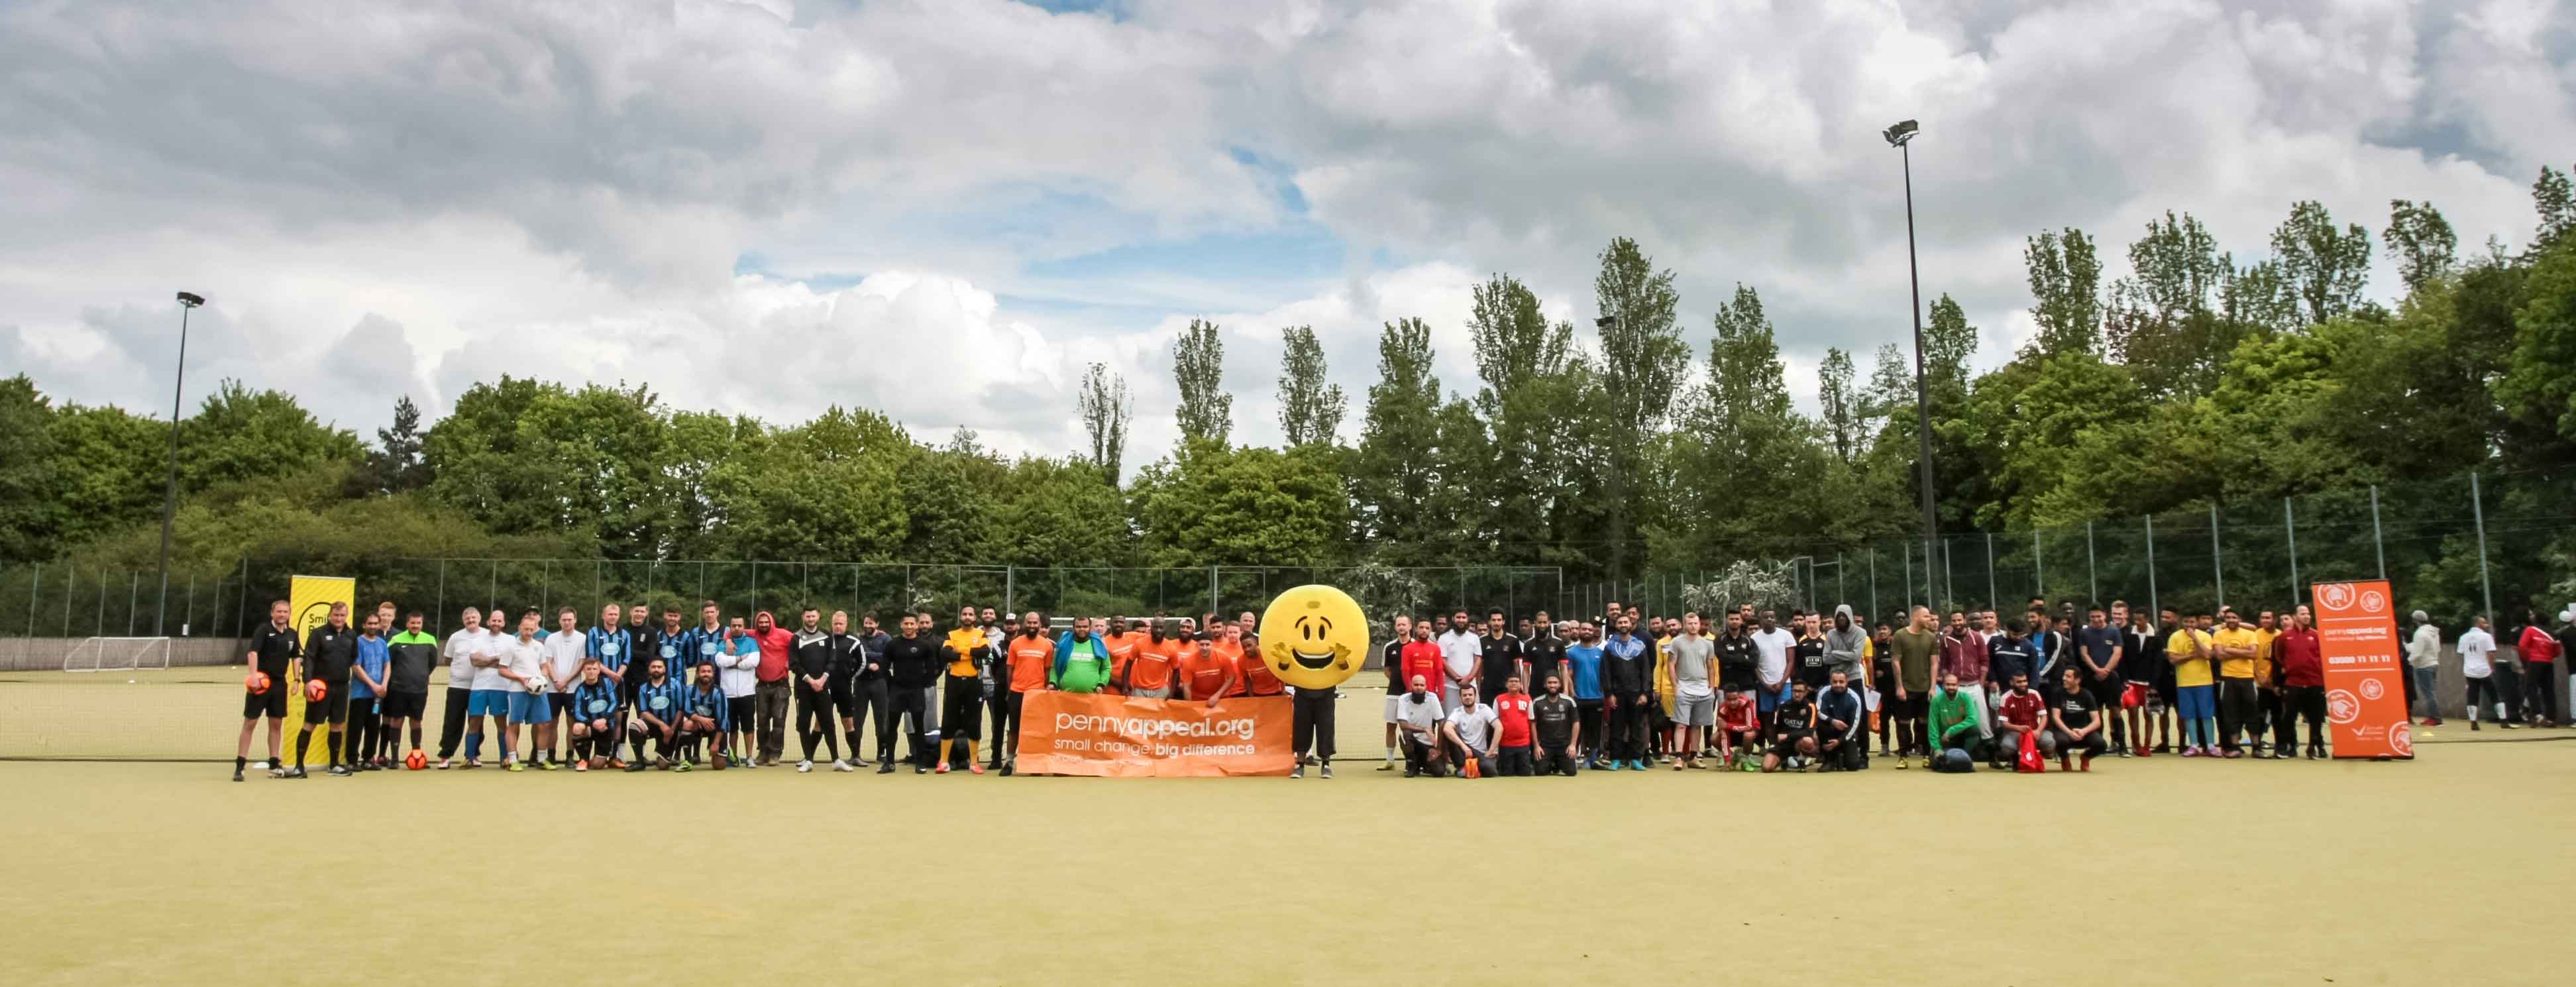 Redditch football tournament for orphans